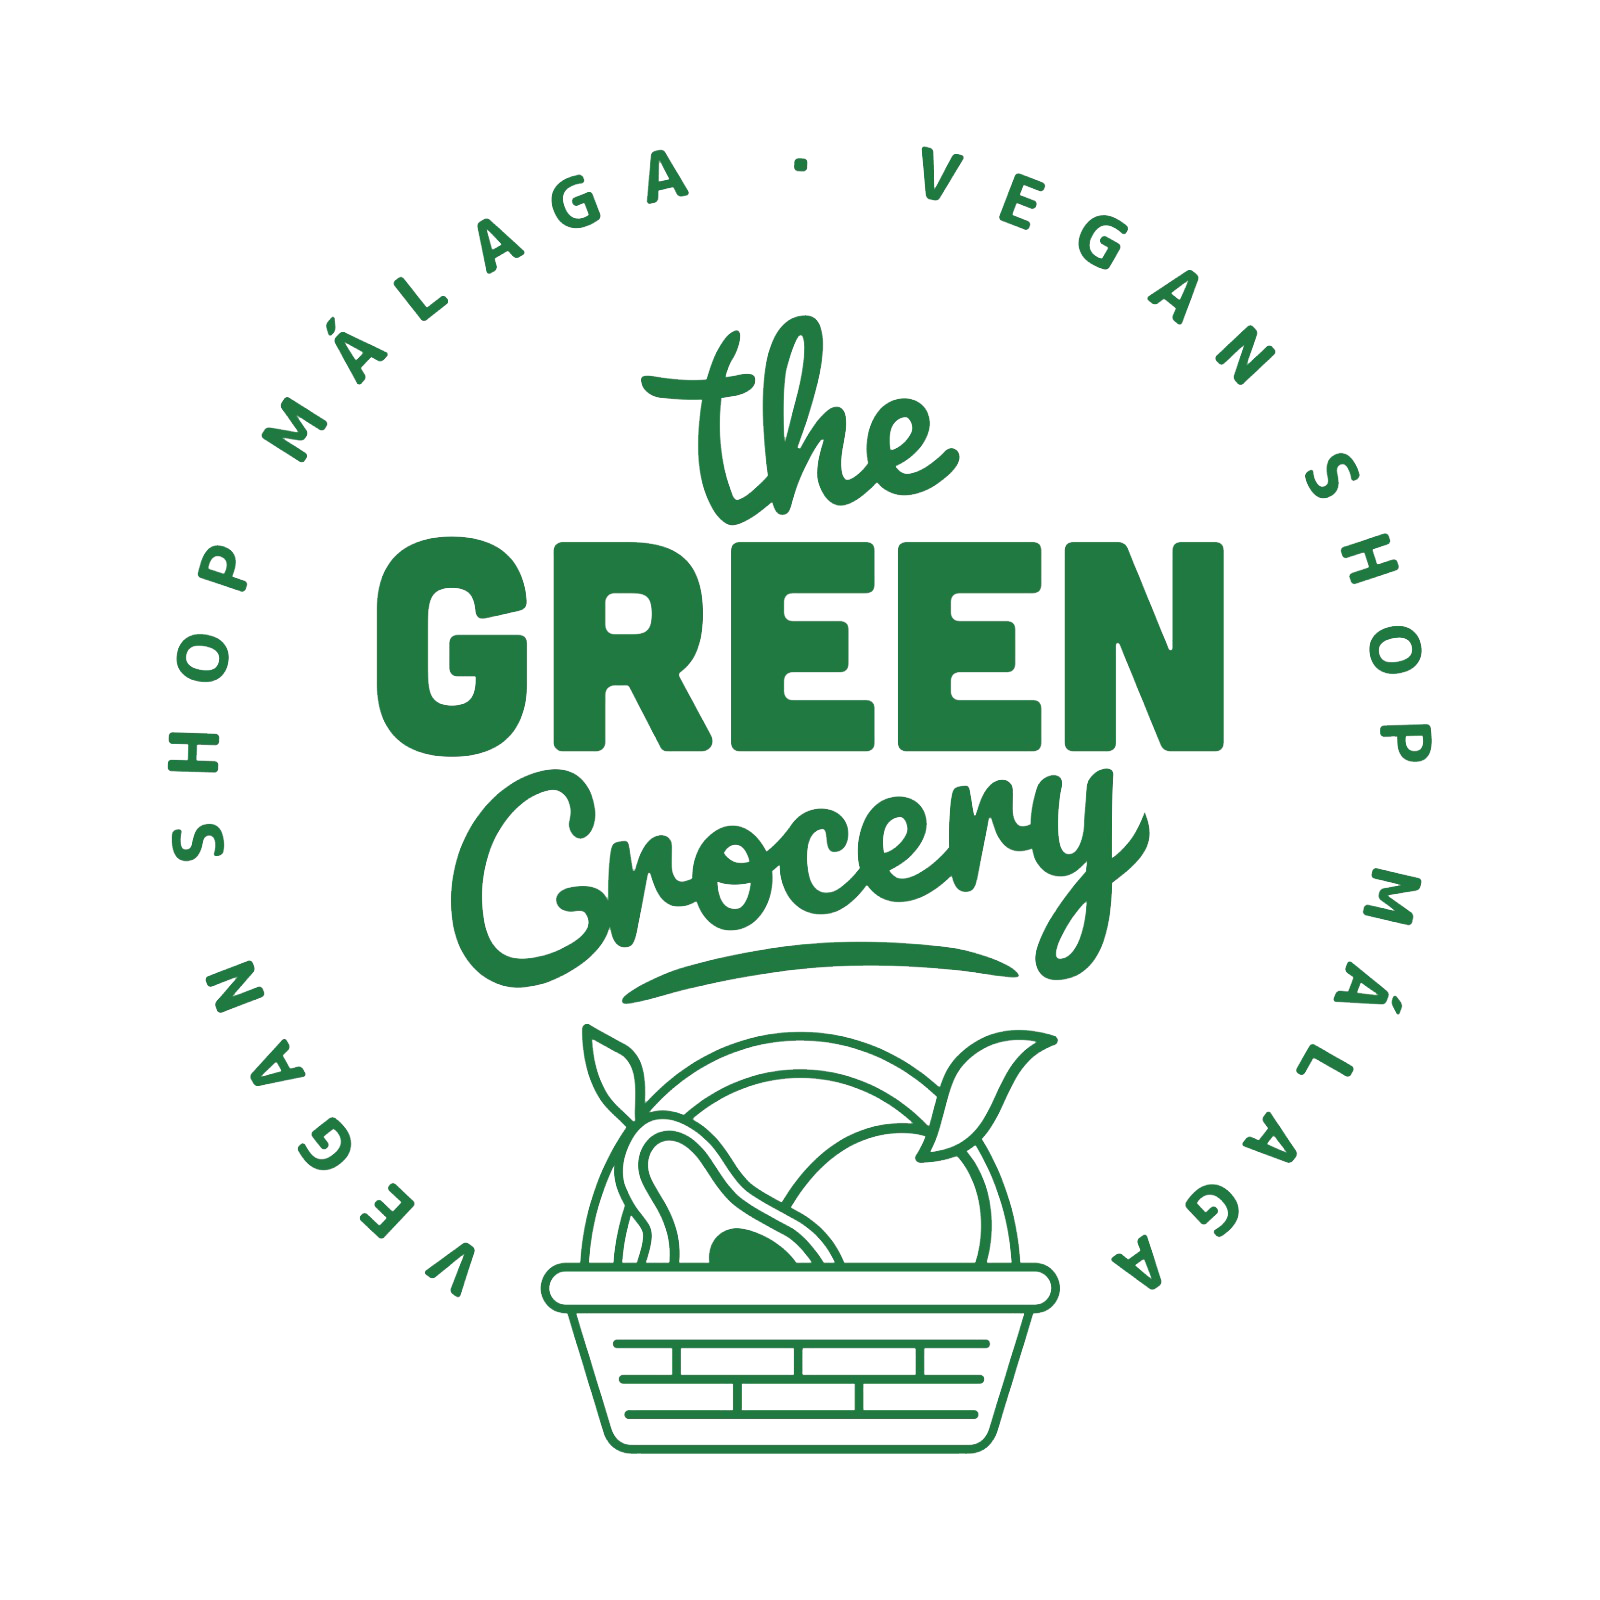 The Greengrocery